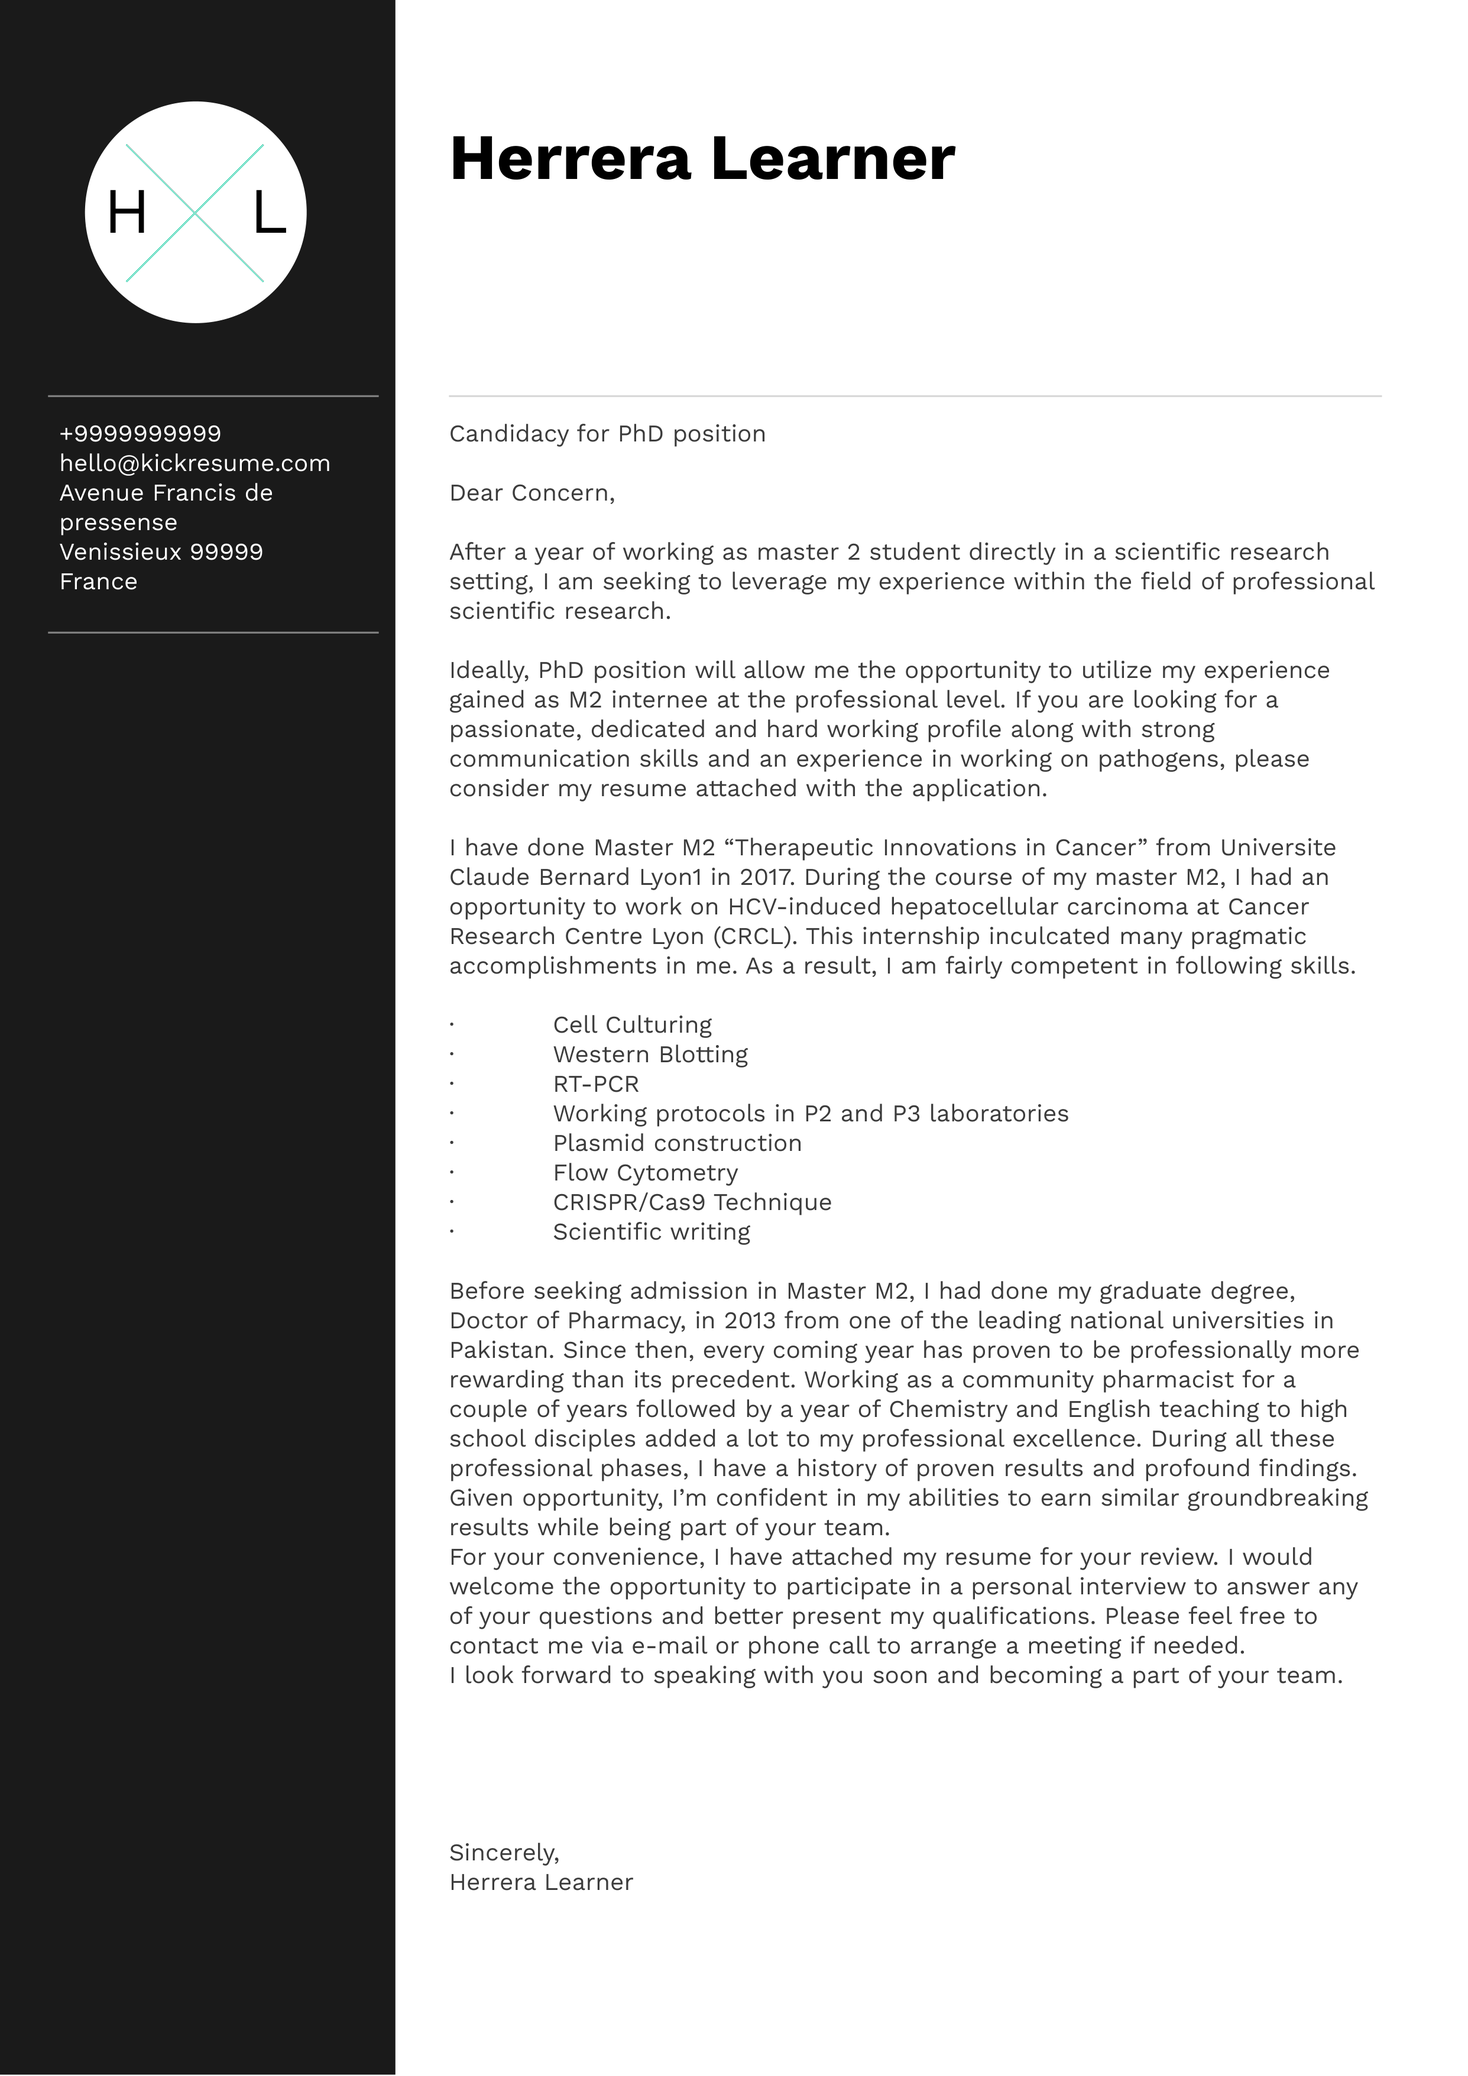 Volvo Machine Learning Intern Cover Letter Sample